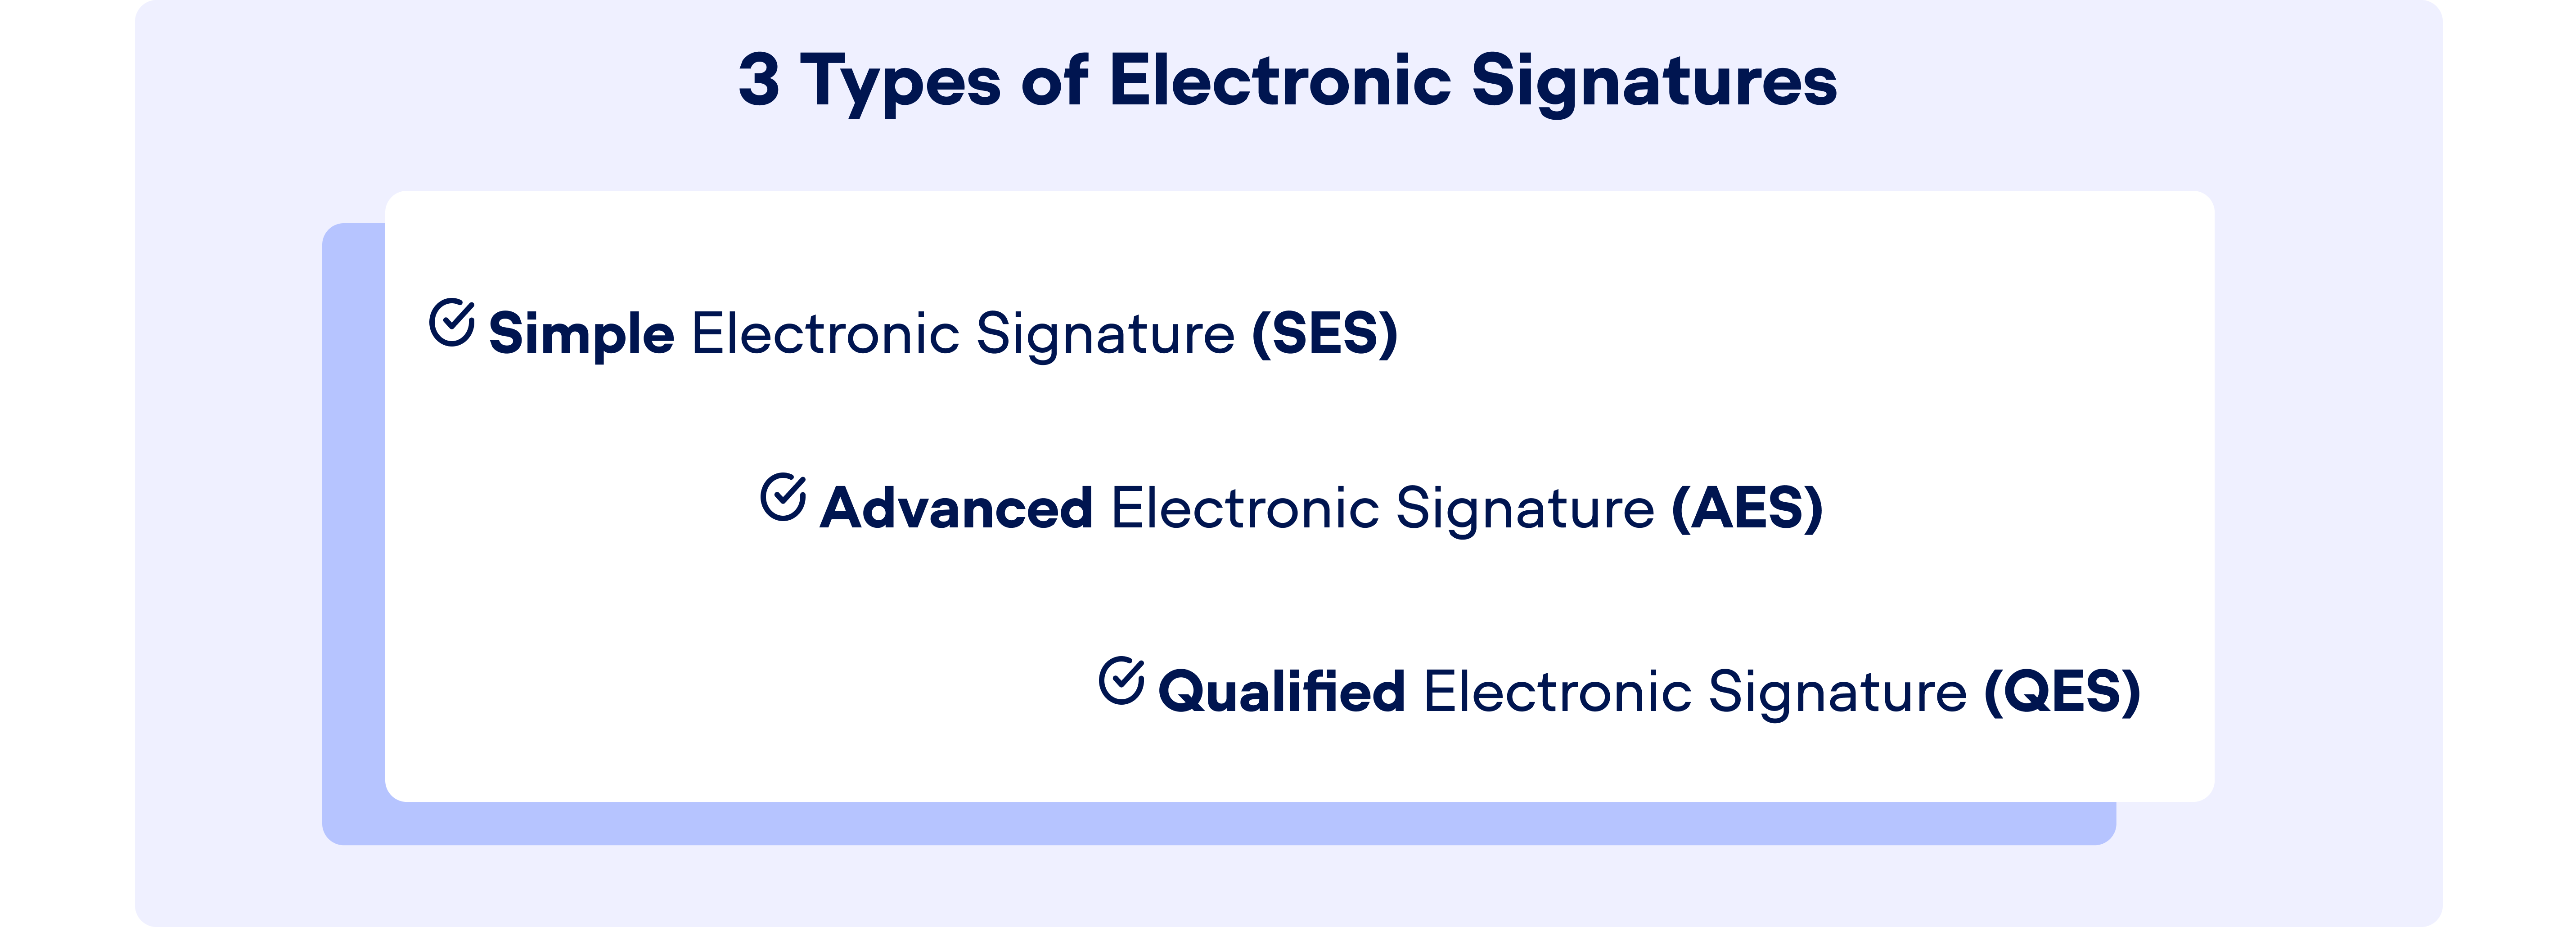 Illustration with 3 types of electronic signatures explained - simple electronic signatures (SES), advanced electronic signatures (AES), qualified electronic signatures (QES)